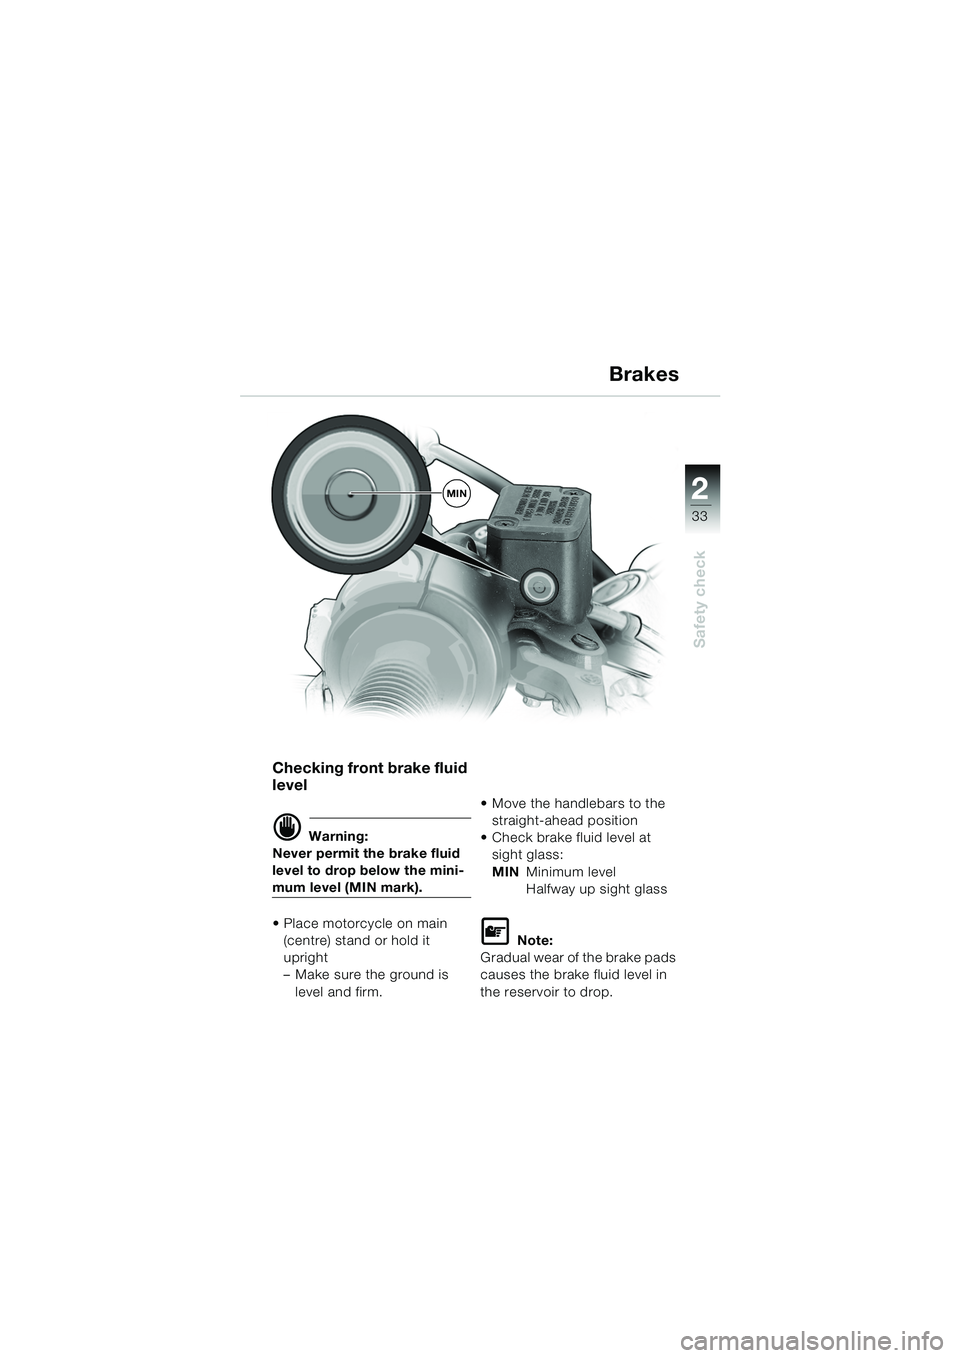 BMW MOTORRAD F 650 GS DAKAR 2003  Riders Manual (in English) 1
33
Safety check
2
Brakes
Checking front brake fluid 
level
d Warning:
Never permit the brake fluid 
level to drop below the mini-
mum level (MIN mark).
• Place motorcycle on main  (centre) stand o